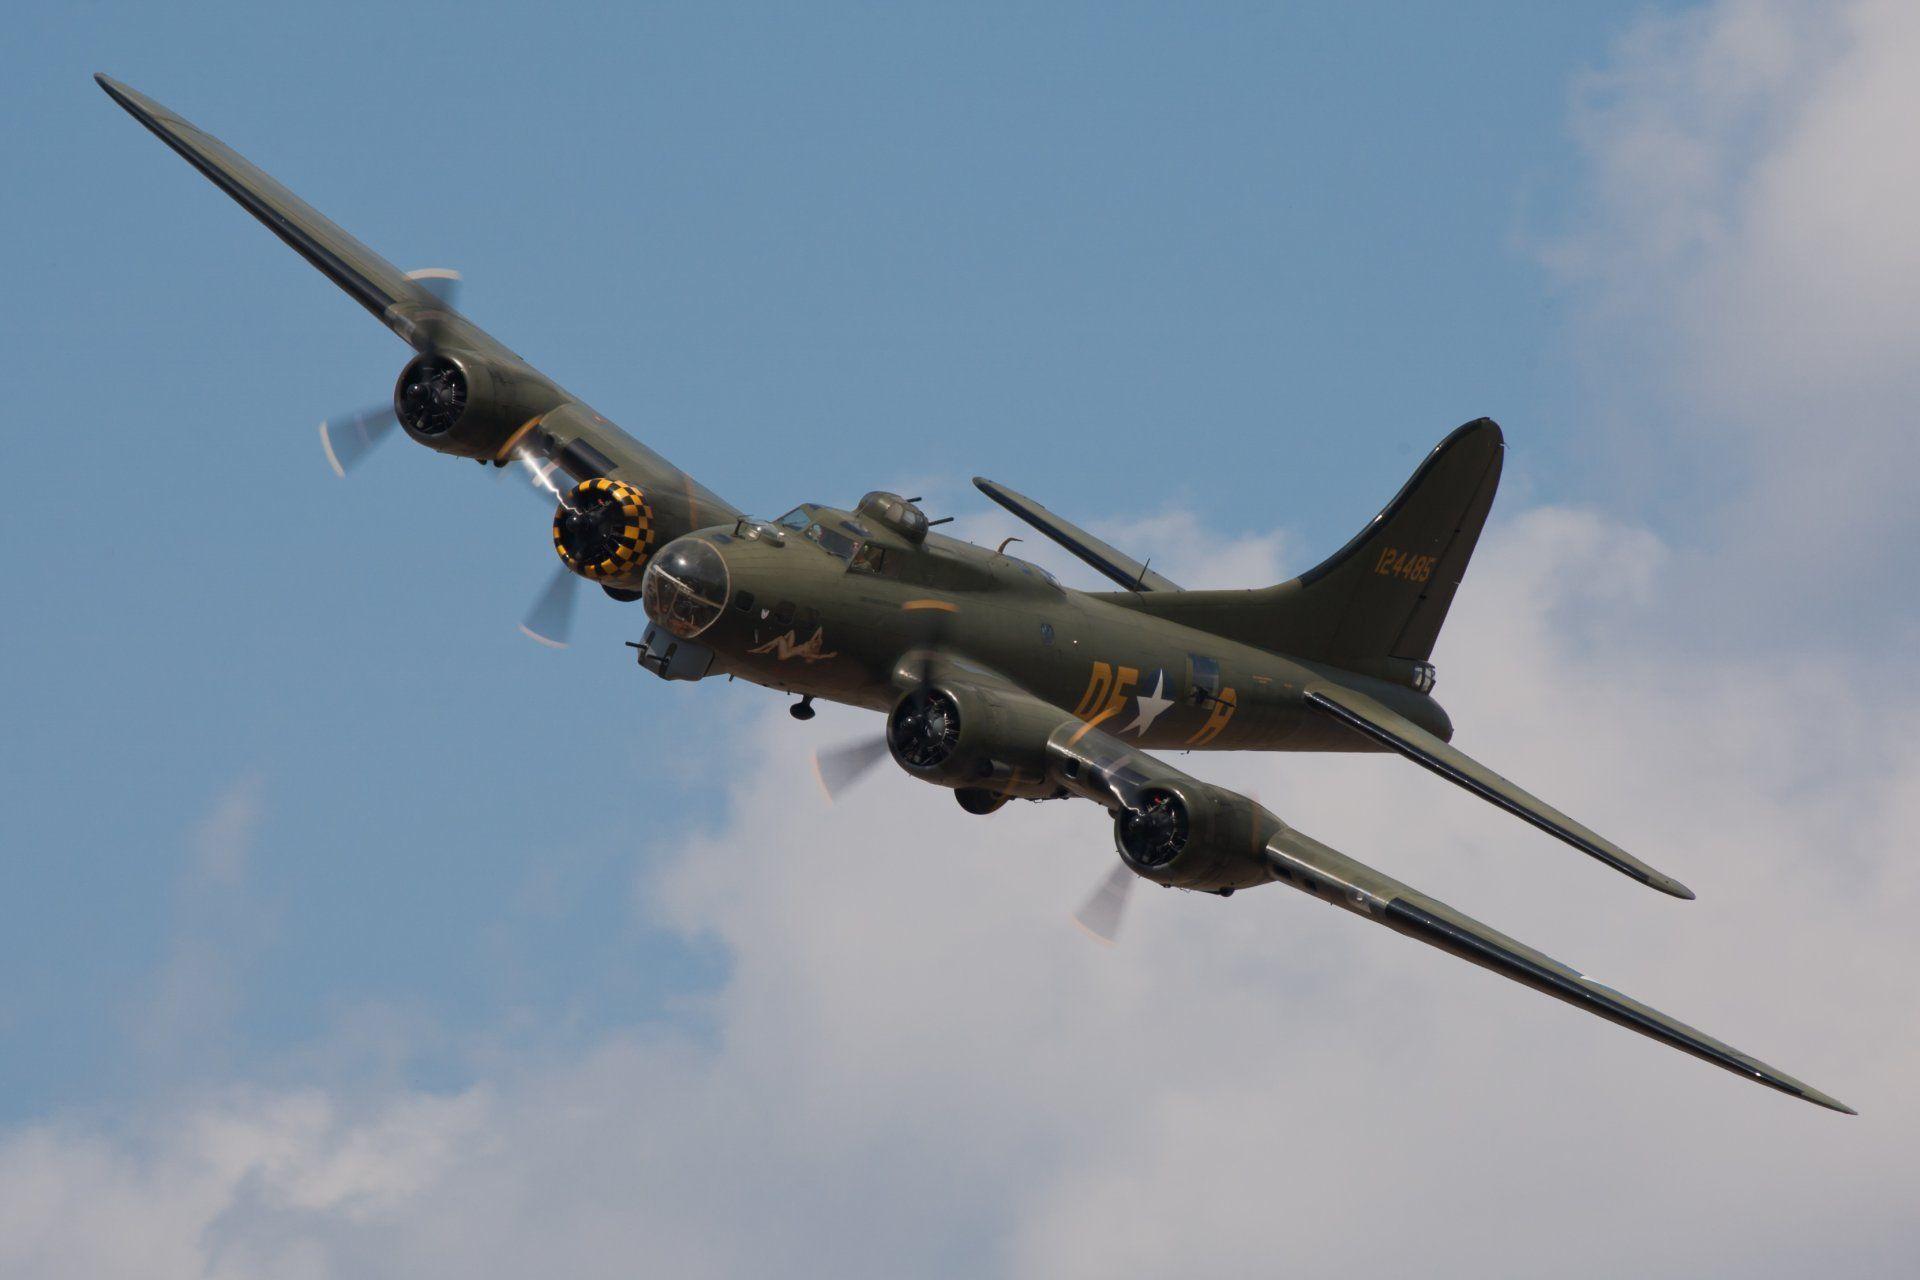 Sky Plane Boeing B 17 Flyig Fortress Flying Fortress American All